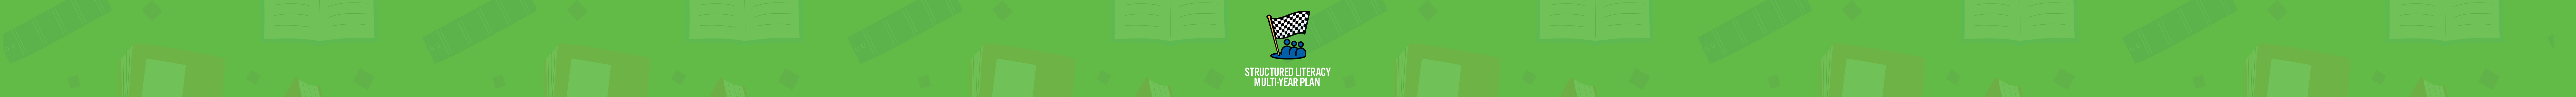 Announcing the WRDSB Structured Literacy Multi-Year Plan